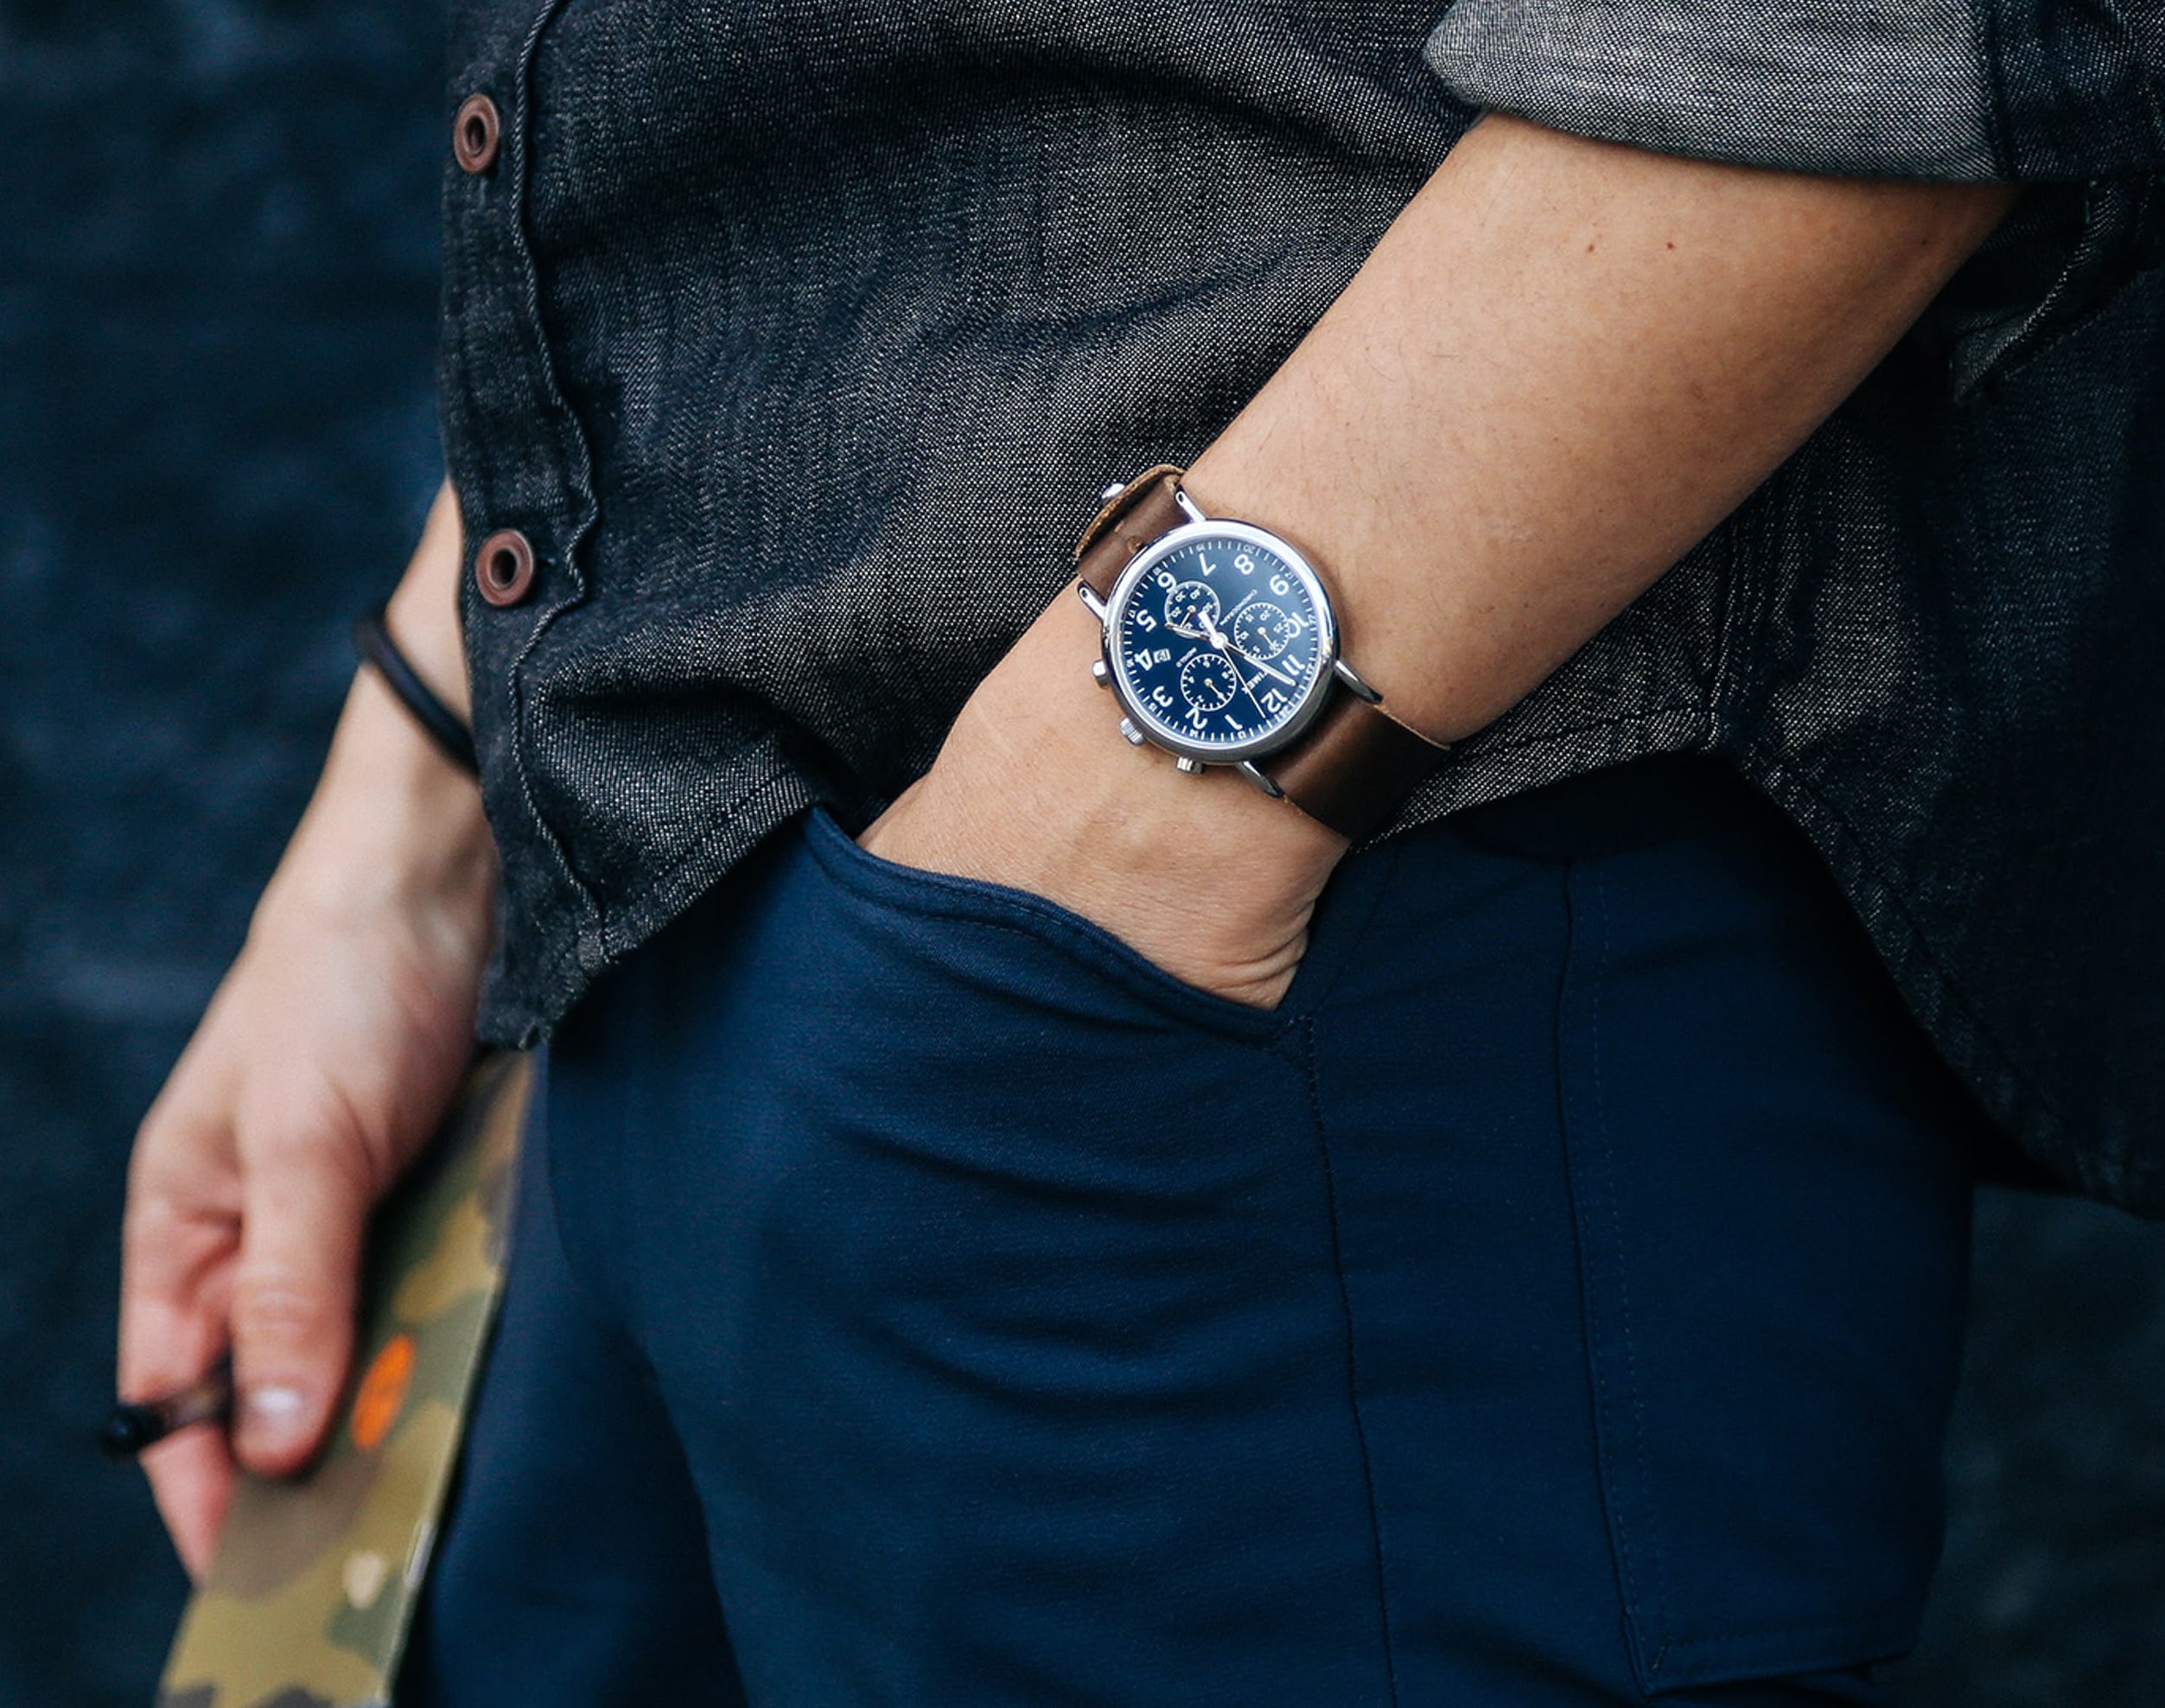 Men's Watches & Bands for the Everyday